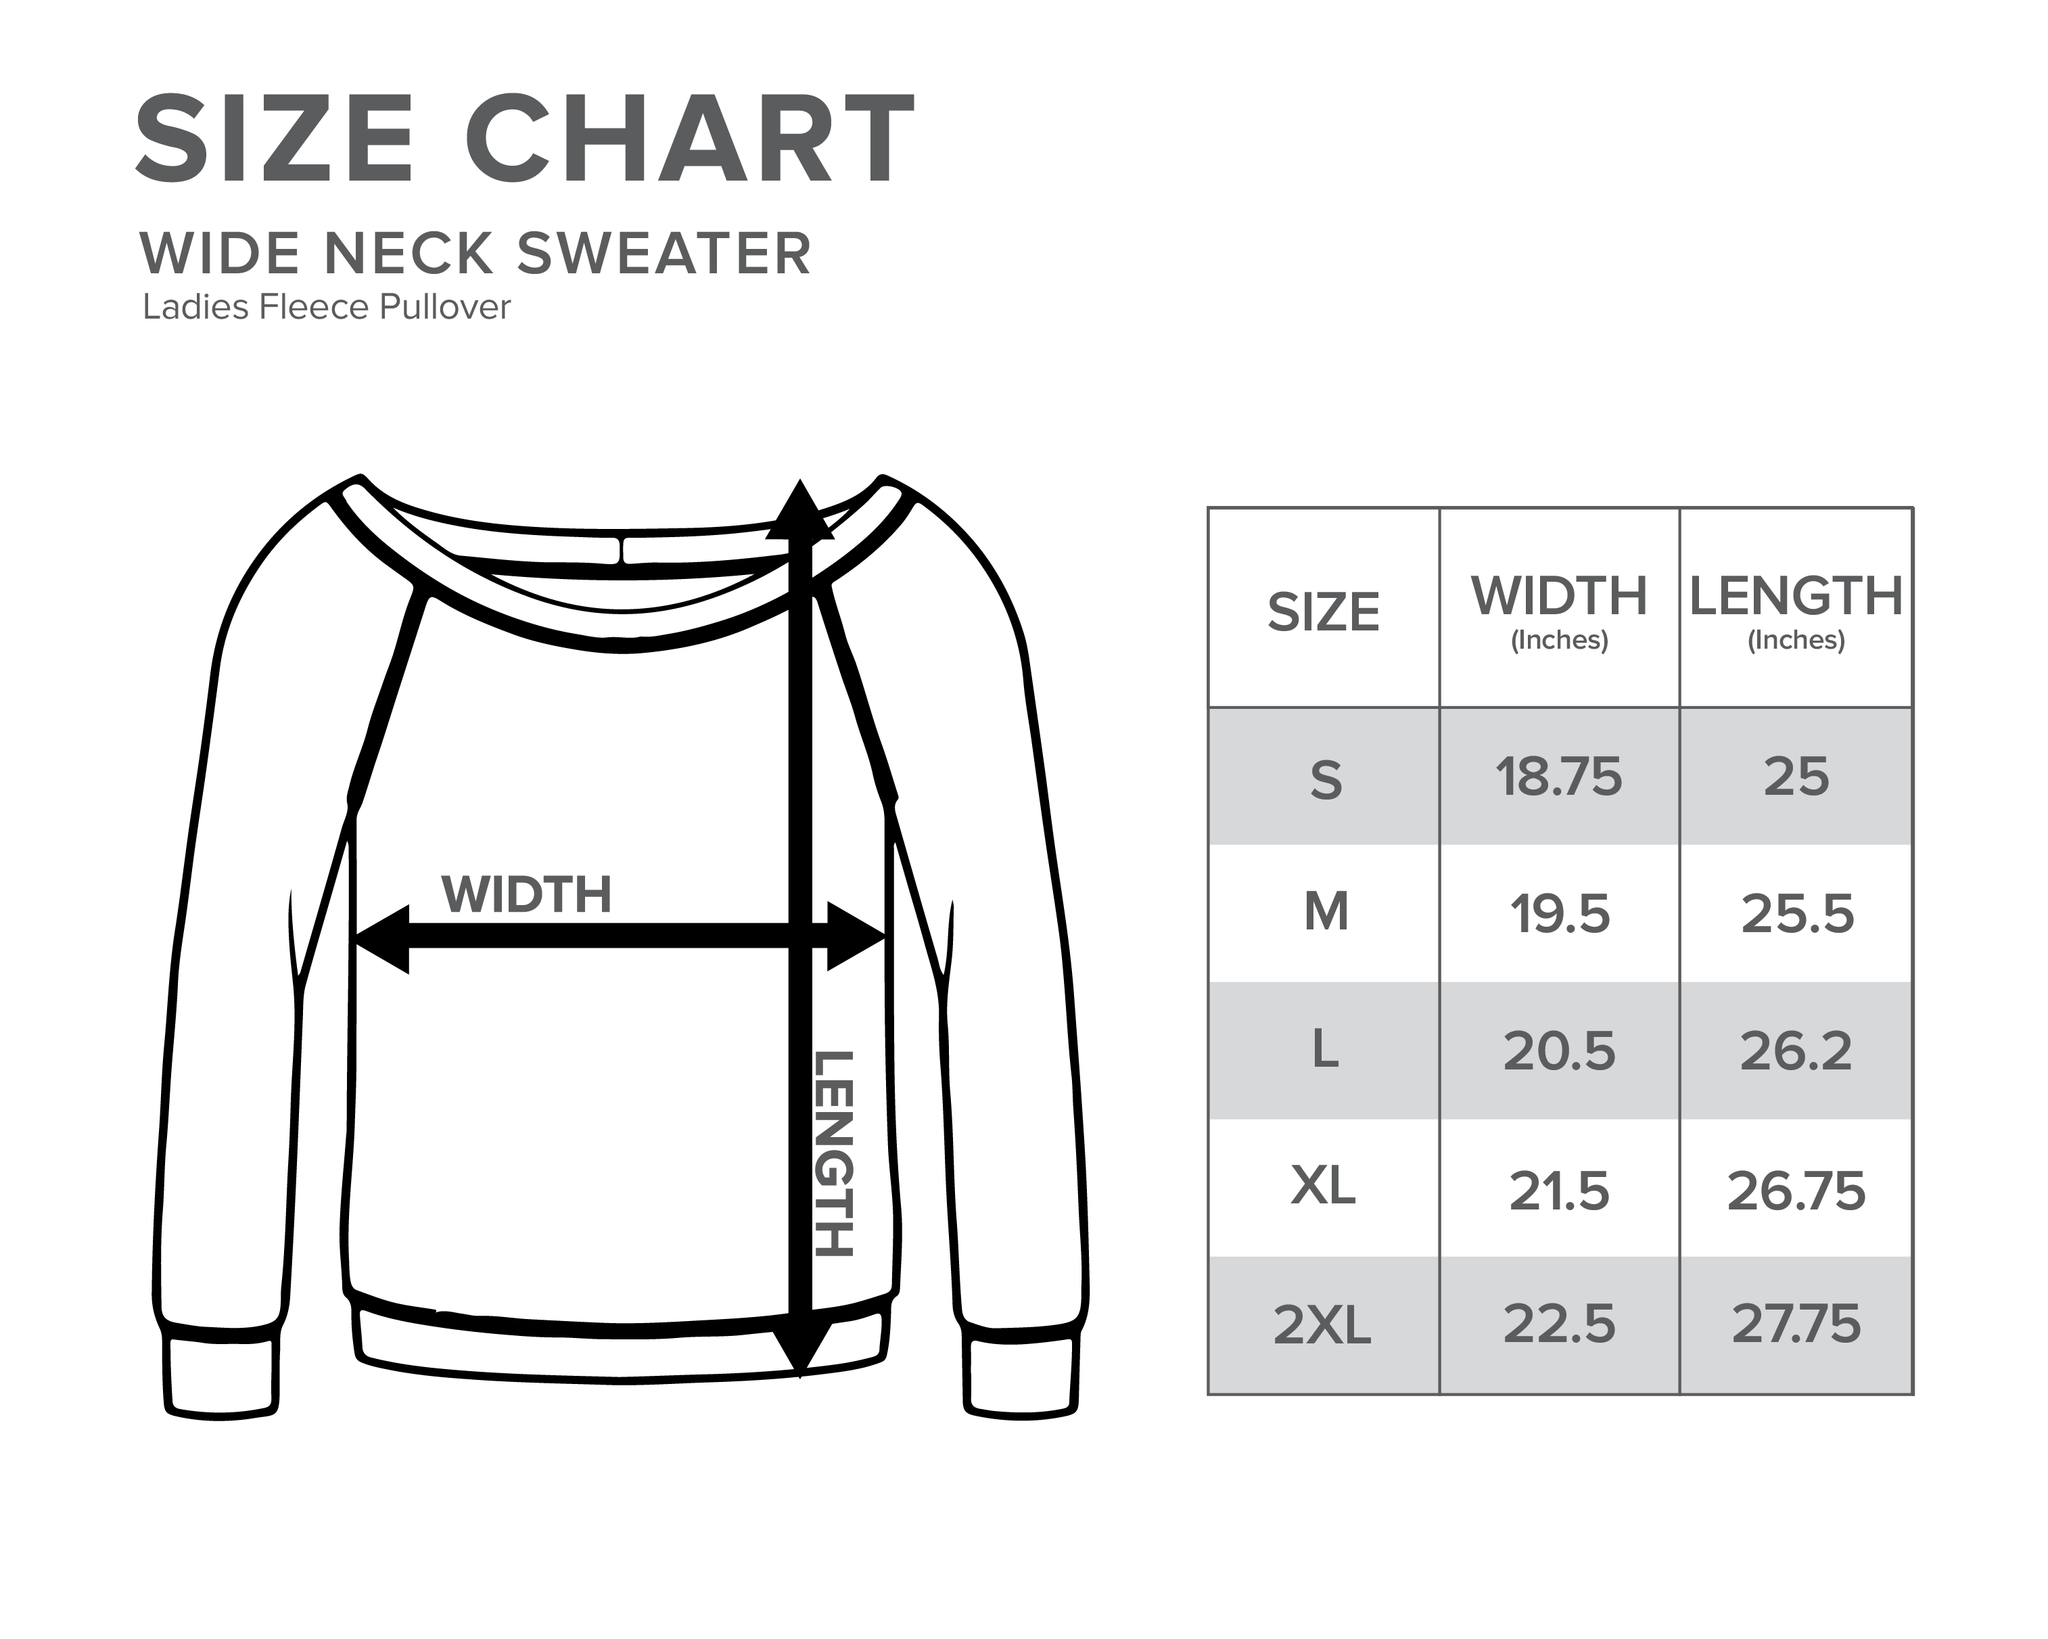 Wide Neck Sweater Materials & Size Guide – Royal Blush Apparel